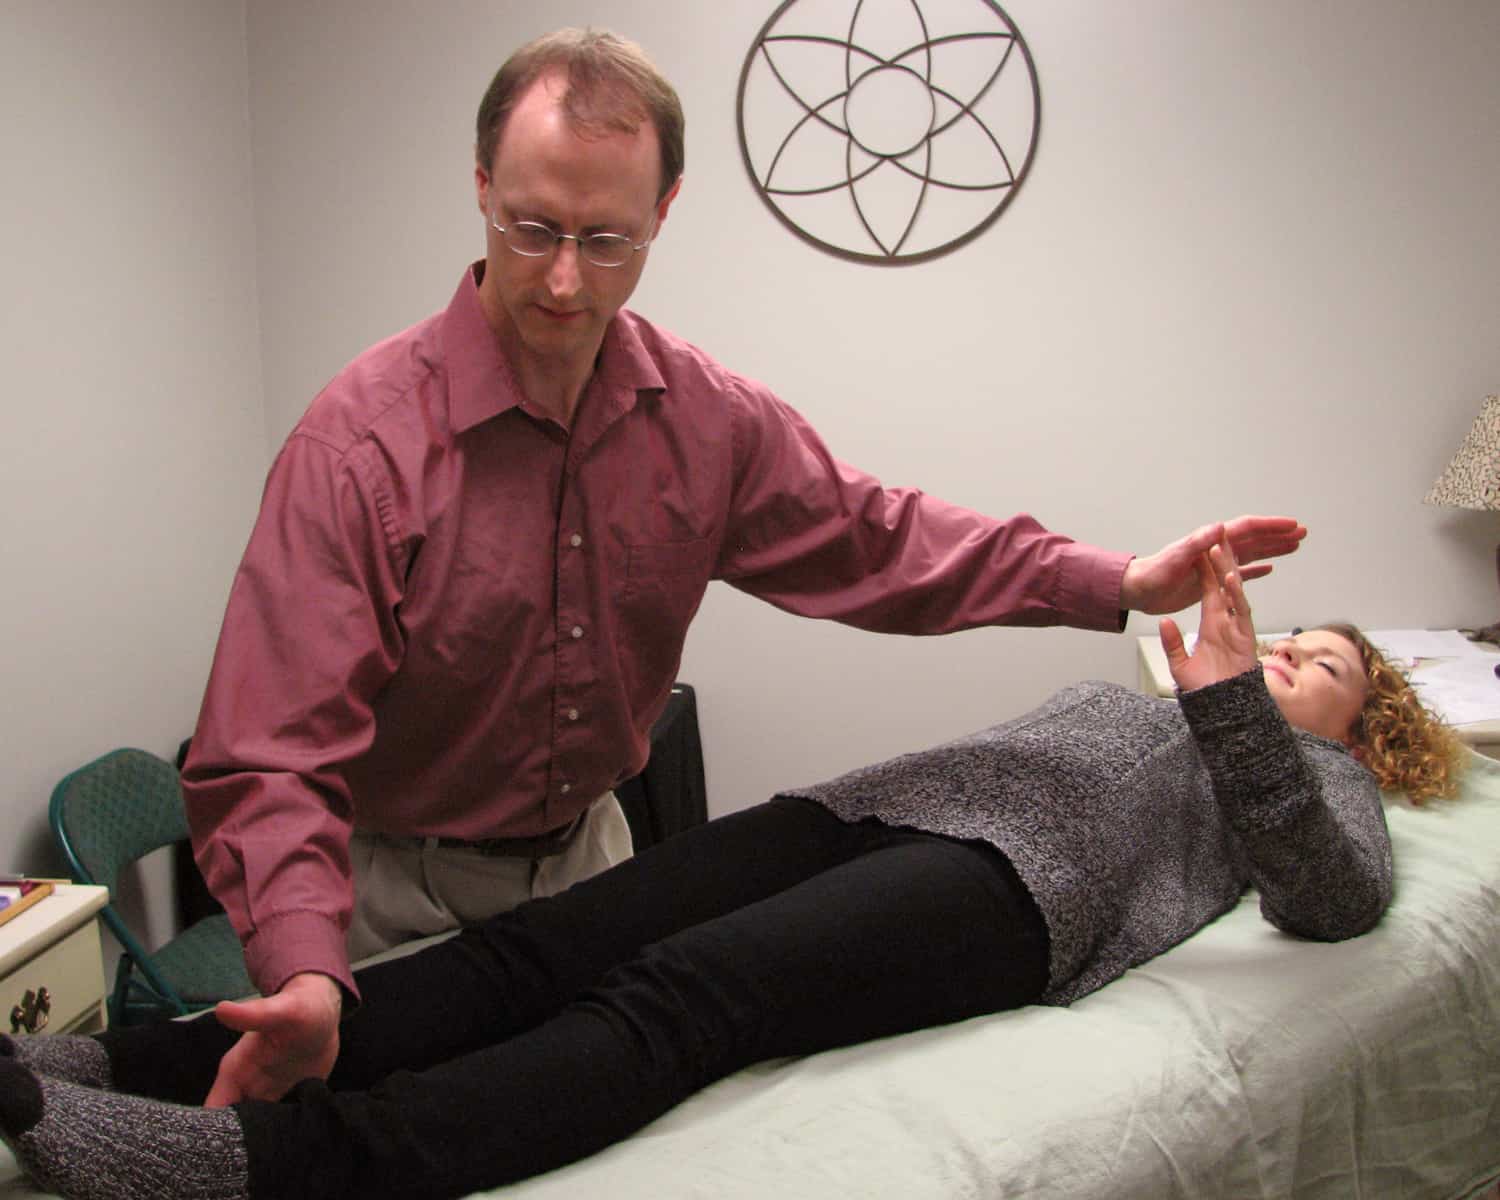 About Energy Kinesiology